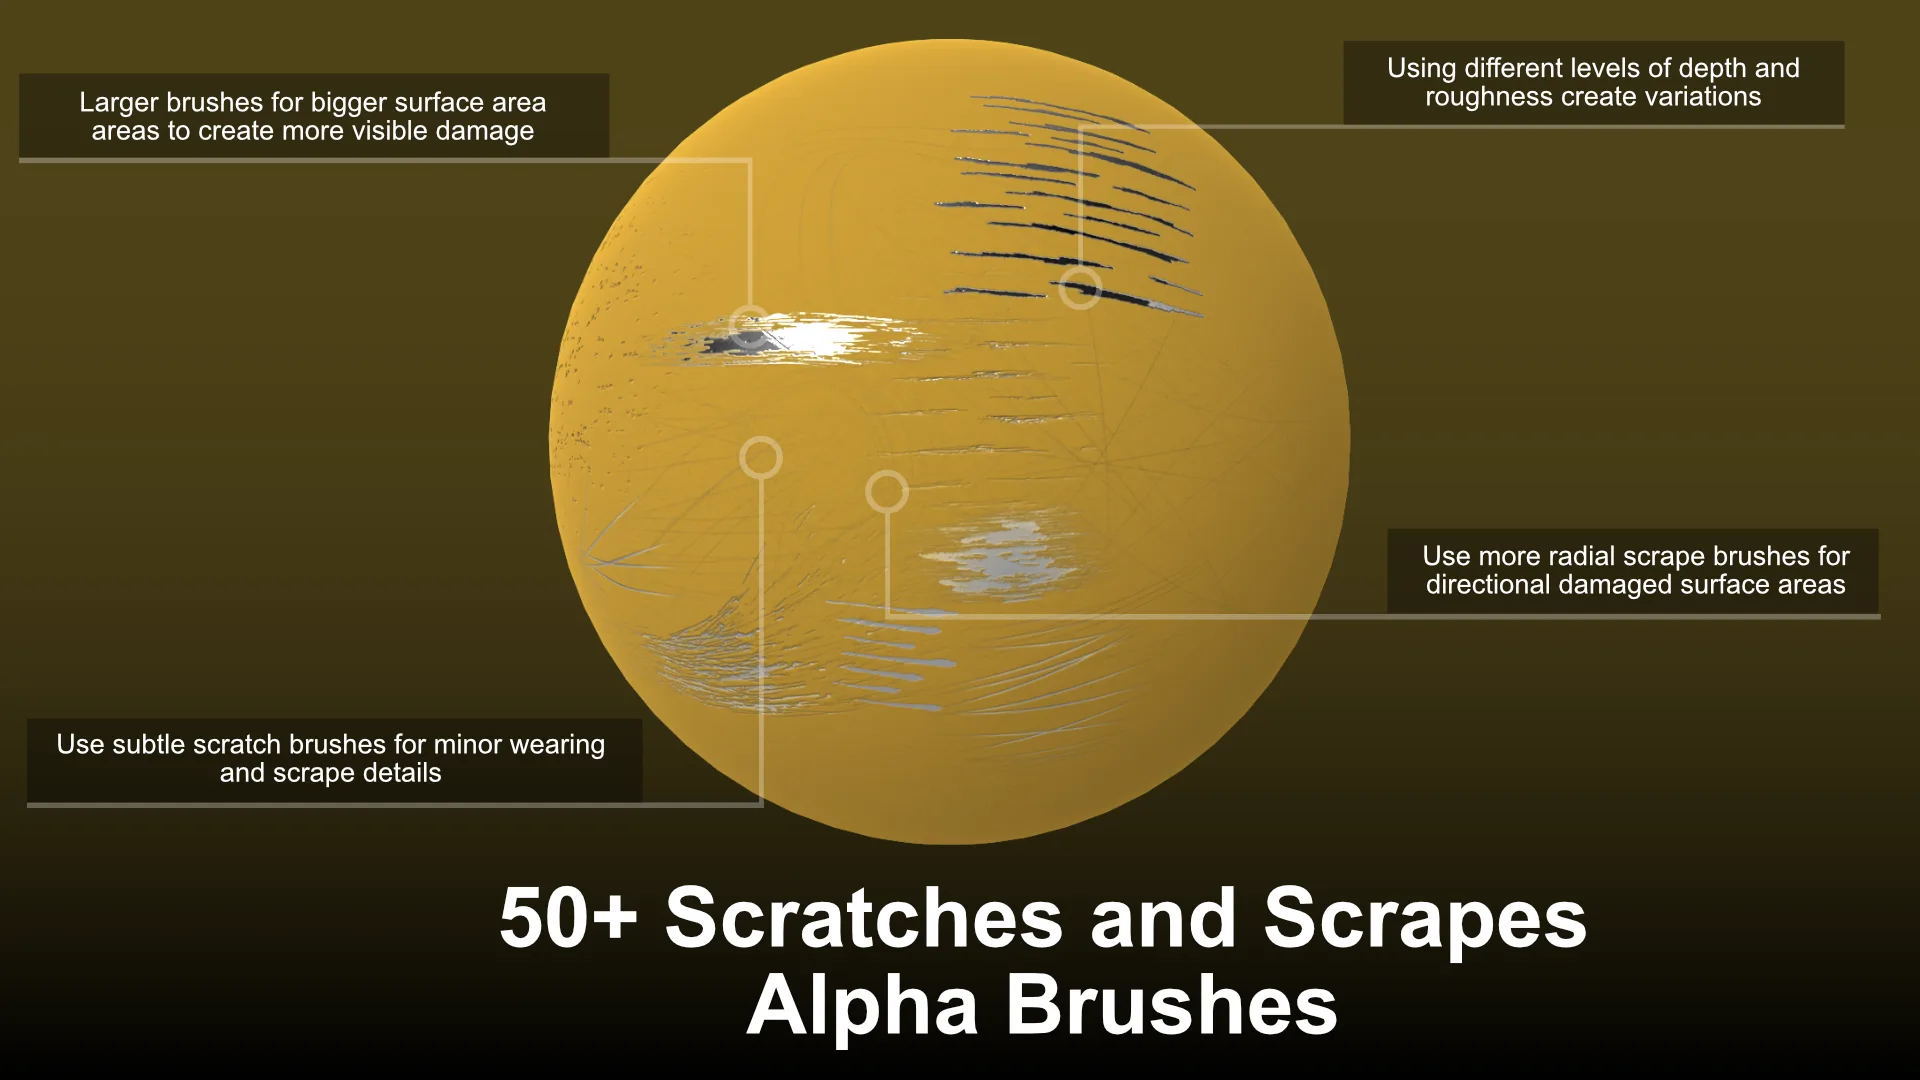 50+ Alpha Brushes - Scratches and Scrapes